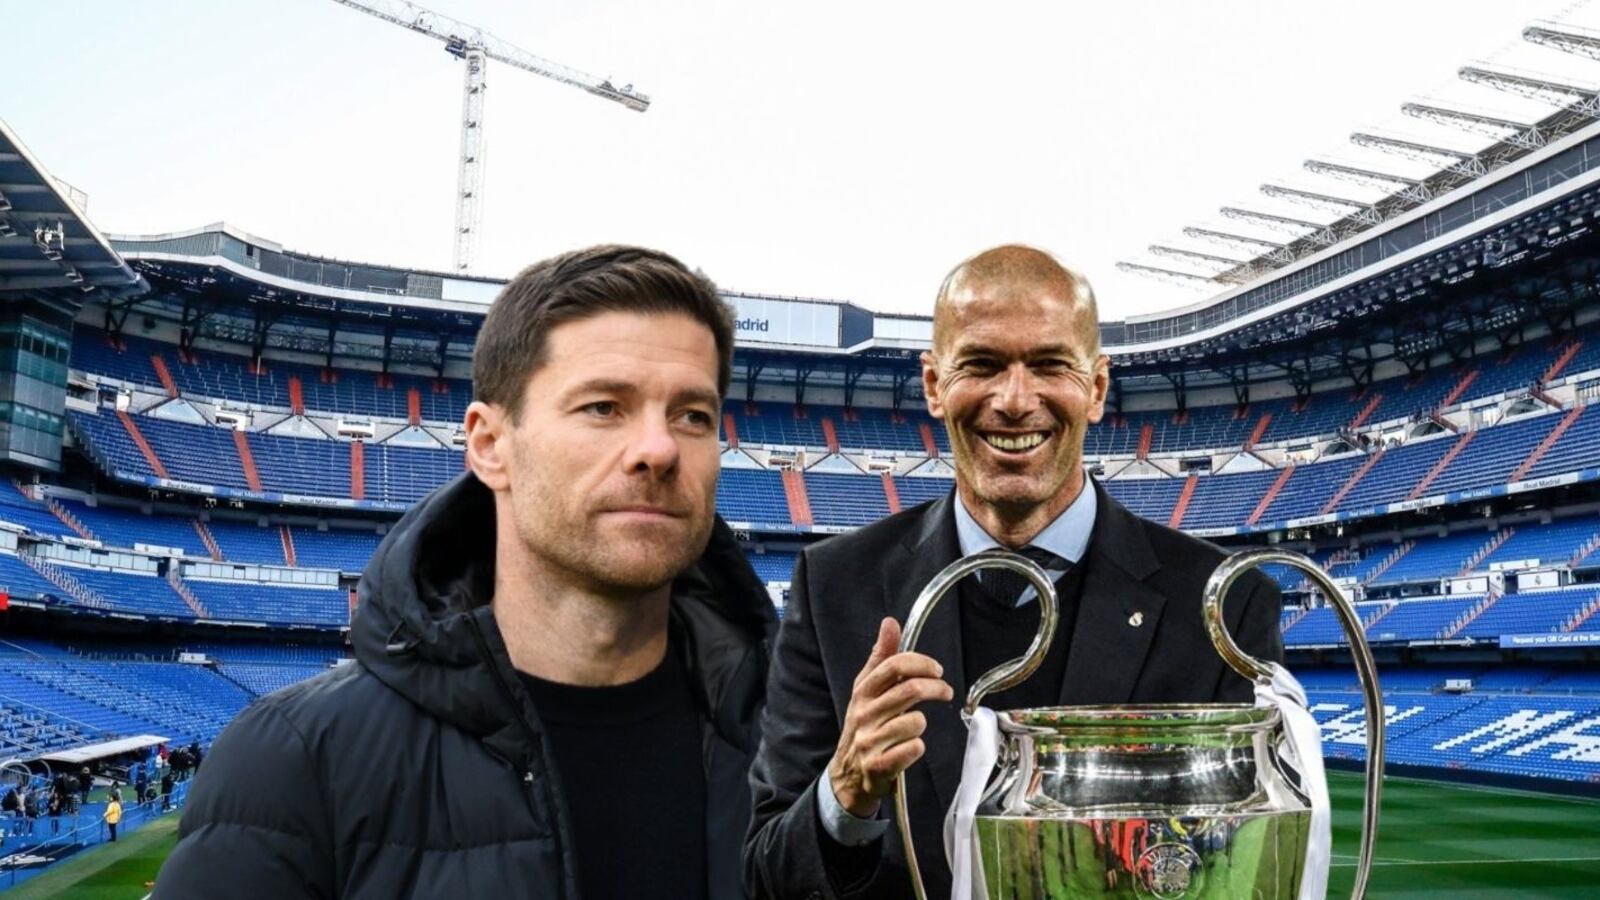 Neither Xabi Alonso nor Zidane, Real Madrid have the most awaited return as coach